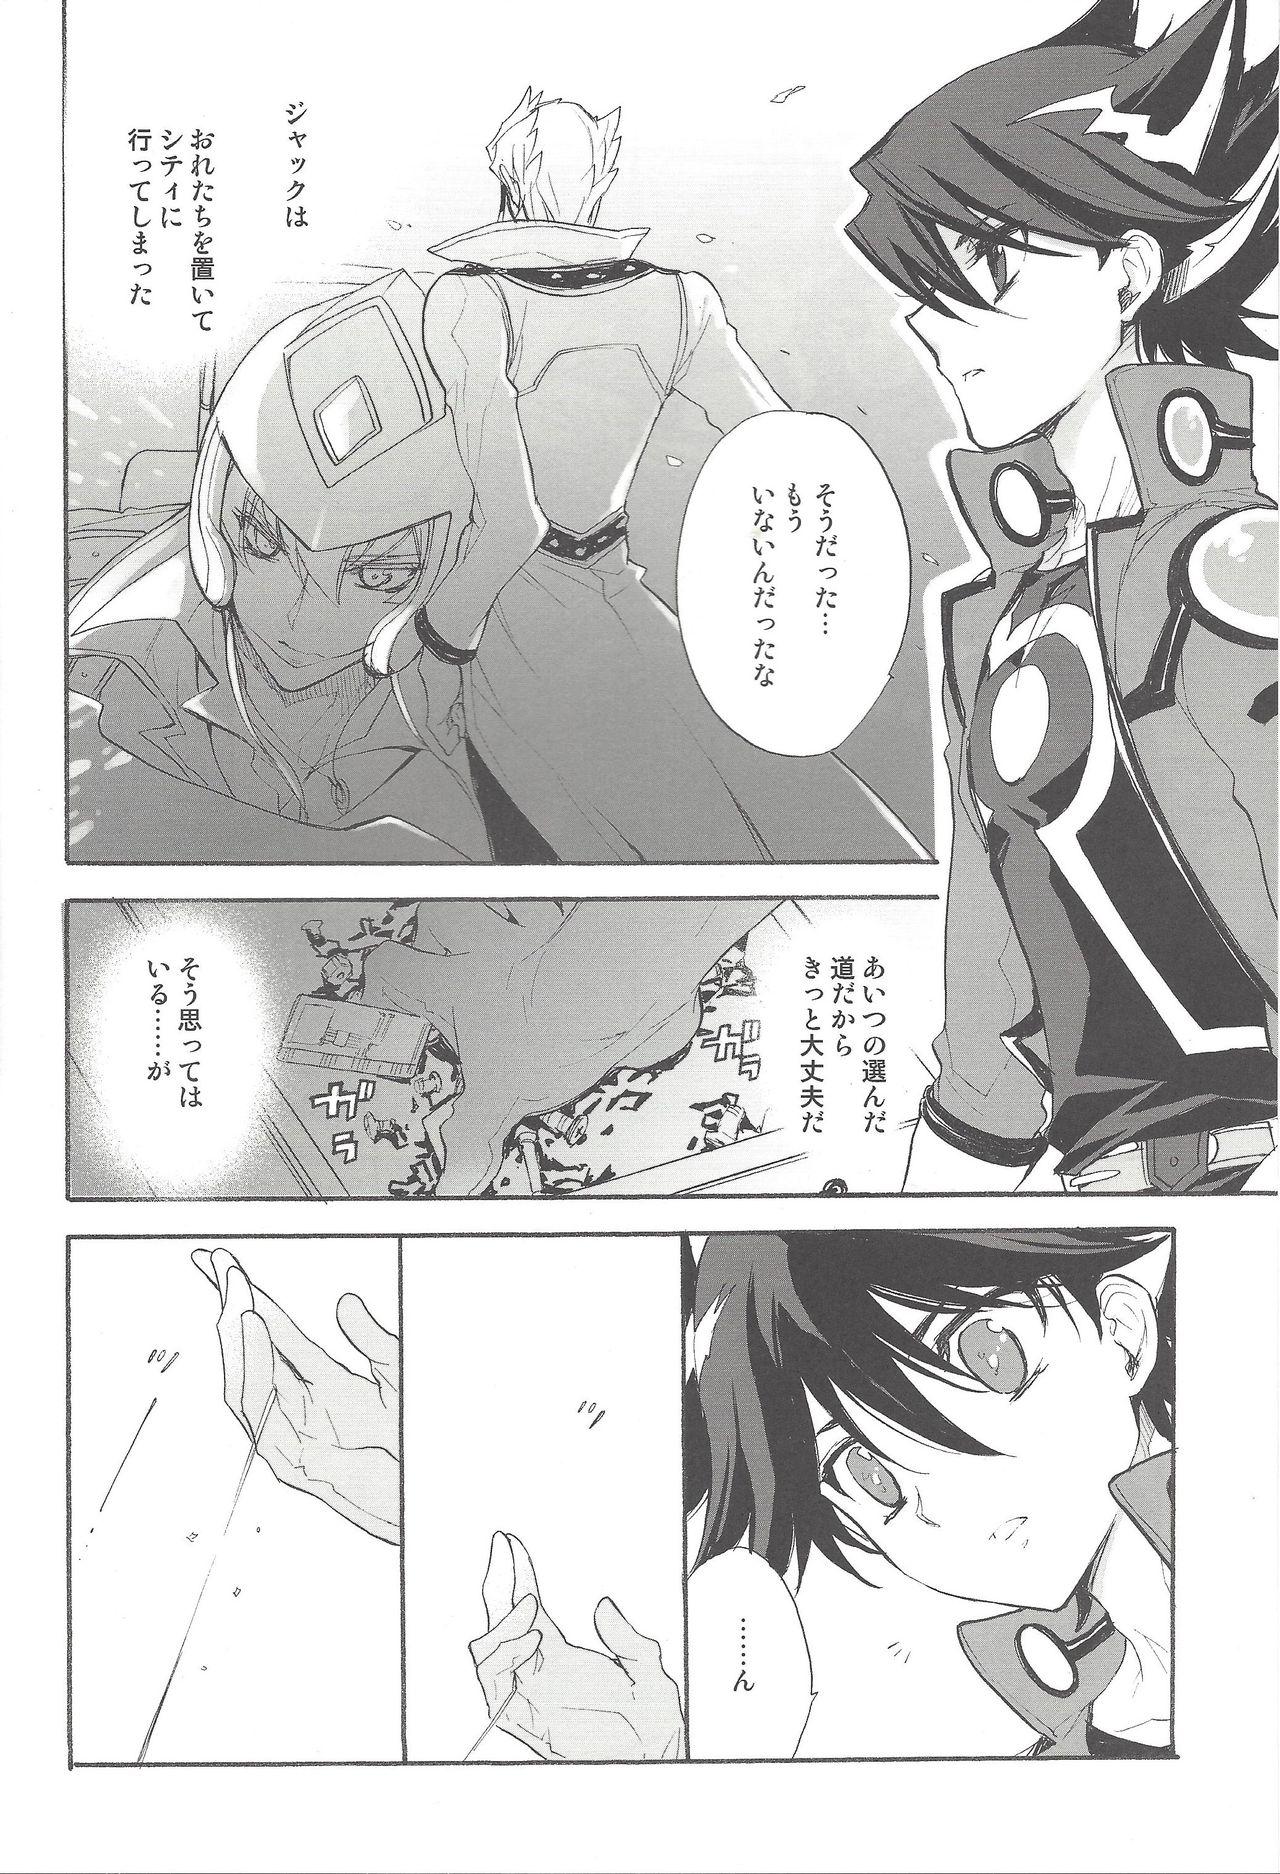 Massage Sex Hoshi no Love Letter - Yu-gi-oh 5ds Perra - Page 7